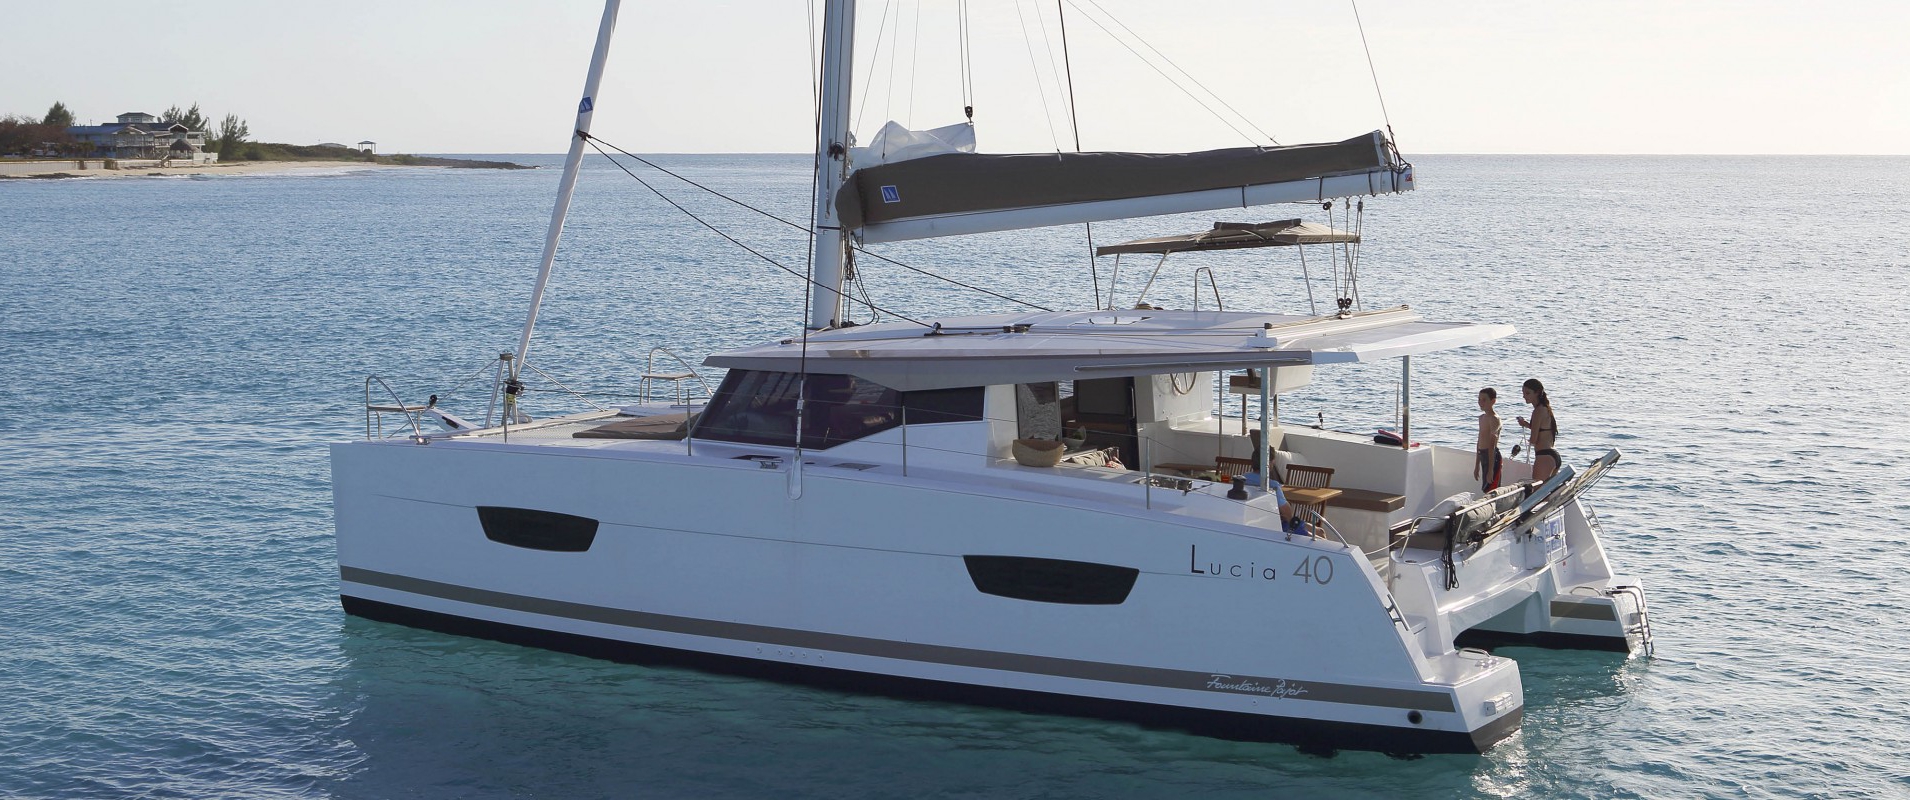 Fountaine Pajot Lucia 40 CLASS Bareboat Charter in Italy